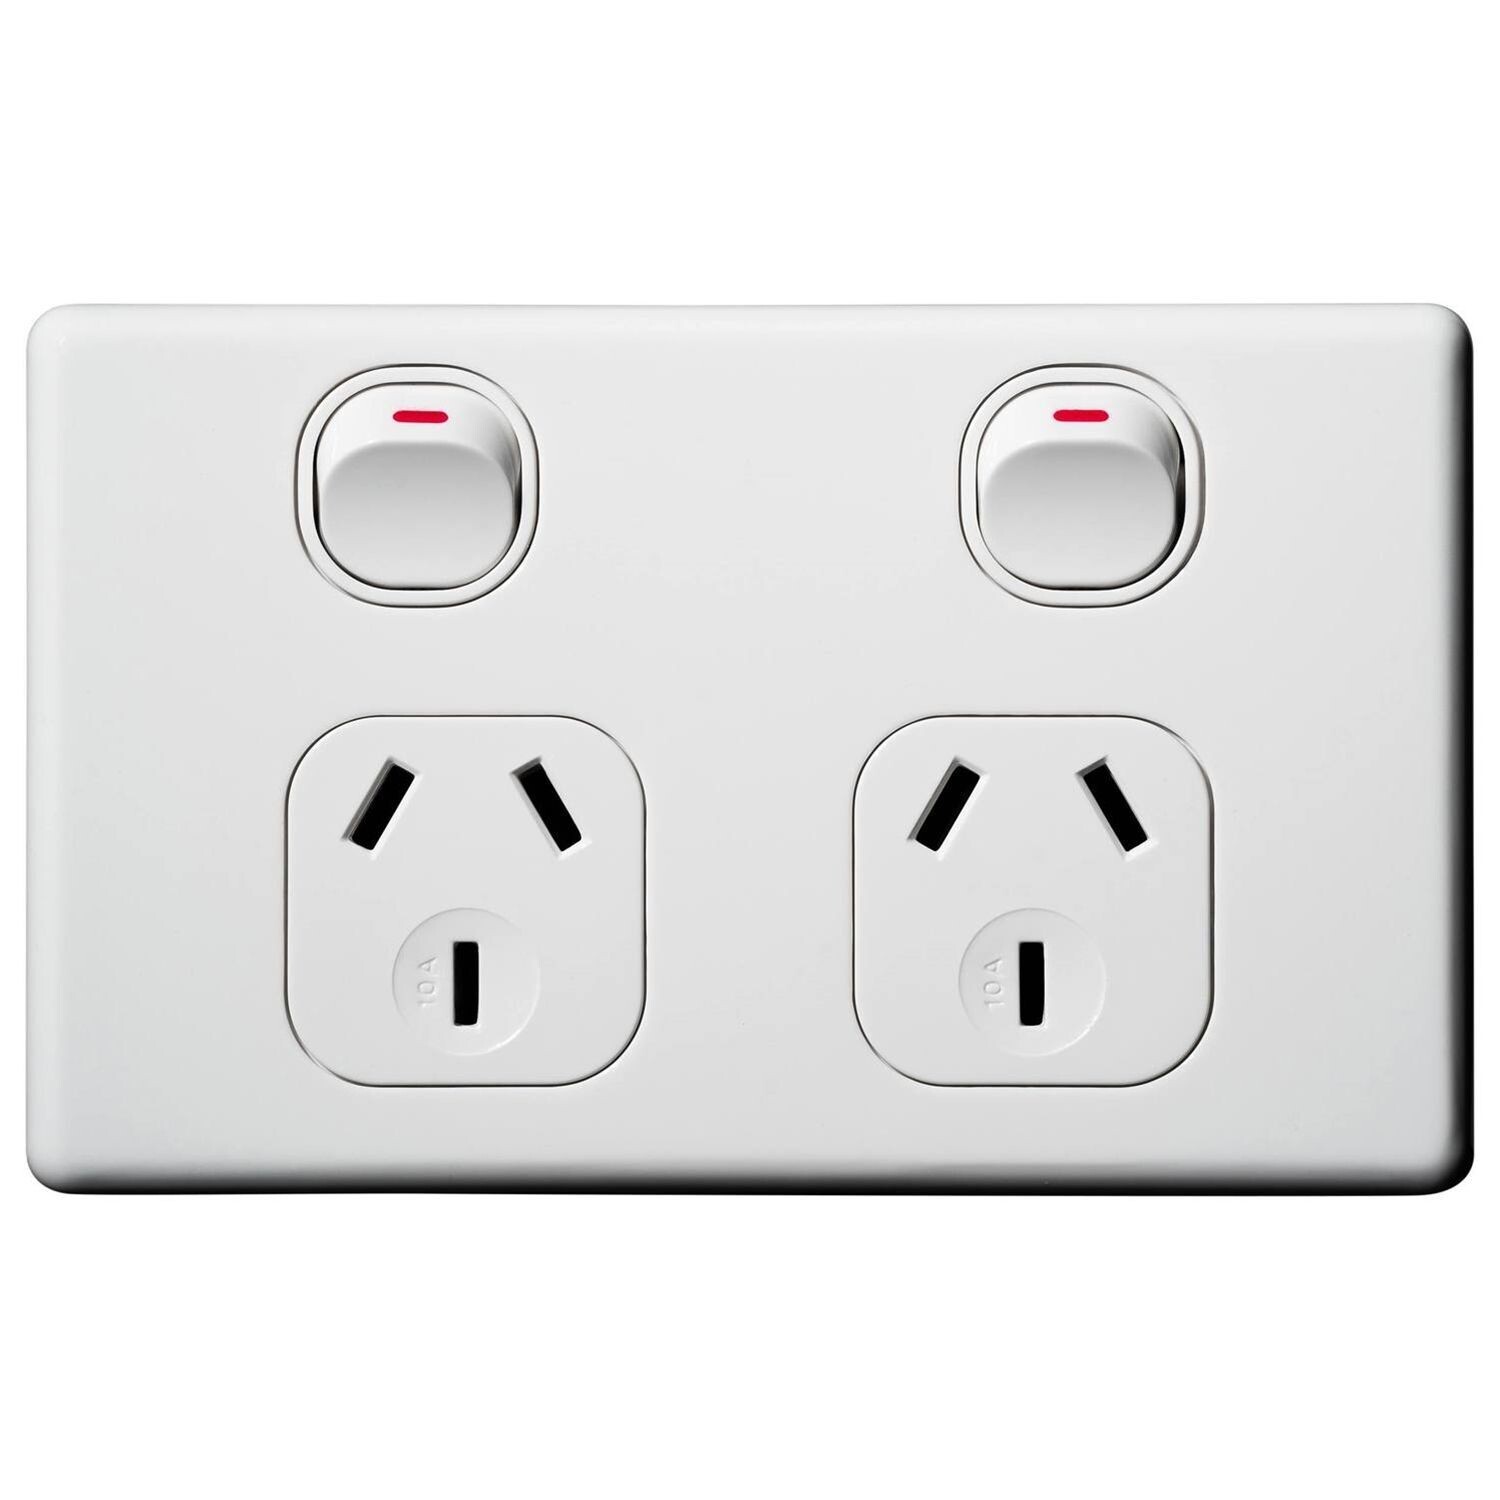 VX Classic Double Power Outlet 250v 10a